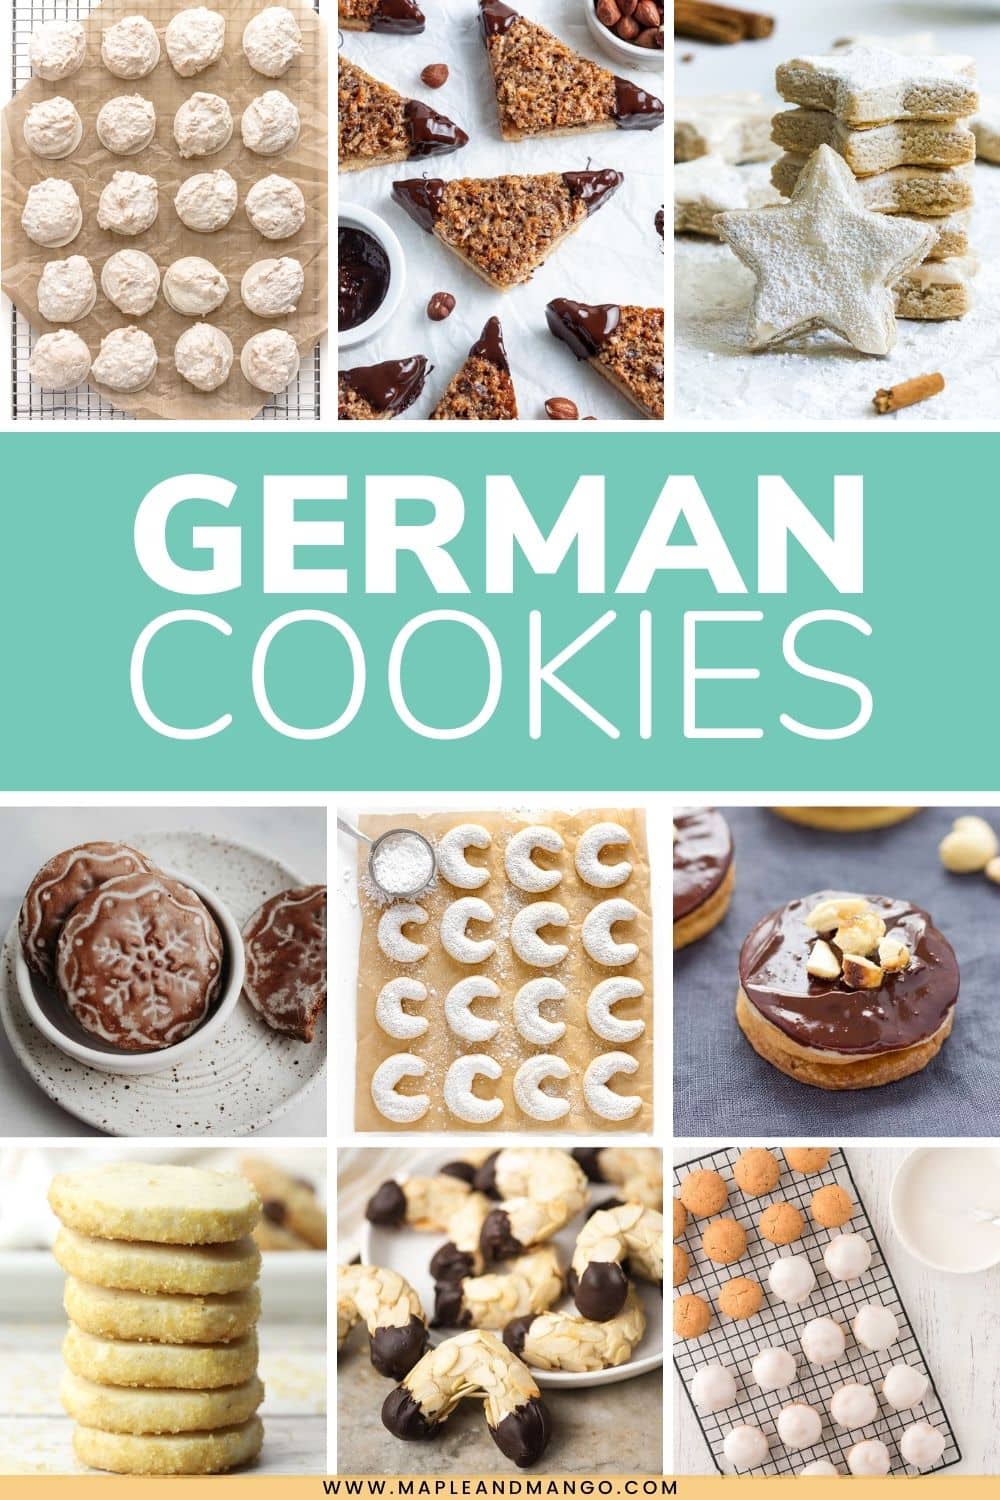 Photo collage graphic of cookies with text overlay "German Cookies".